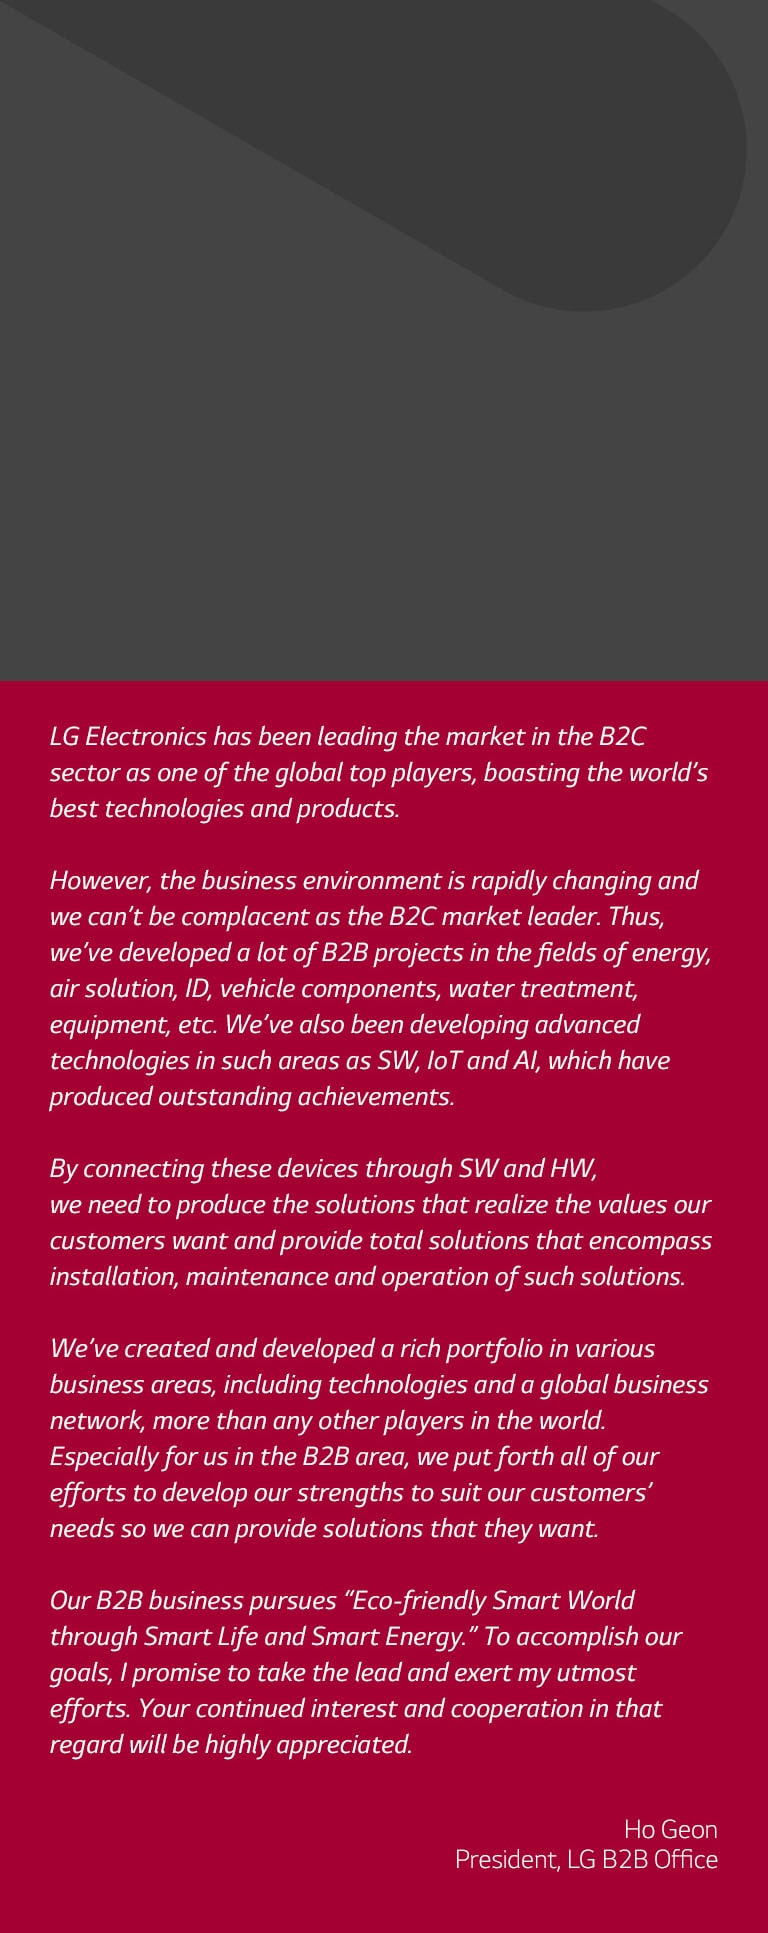 About LG Business_LG.com_PC_02_LG Exceeds Expectations with Innovative Products